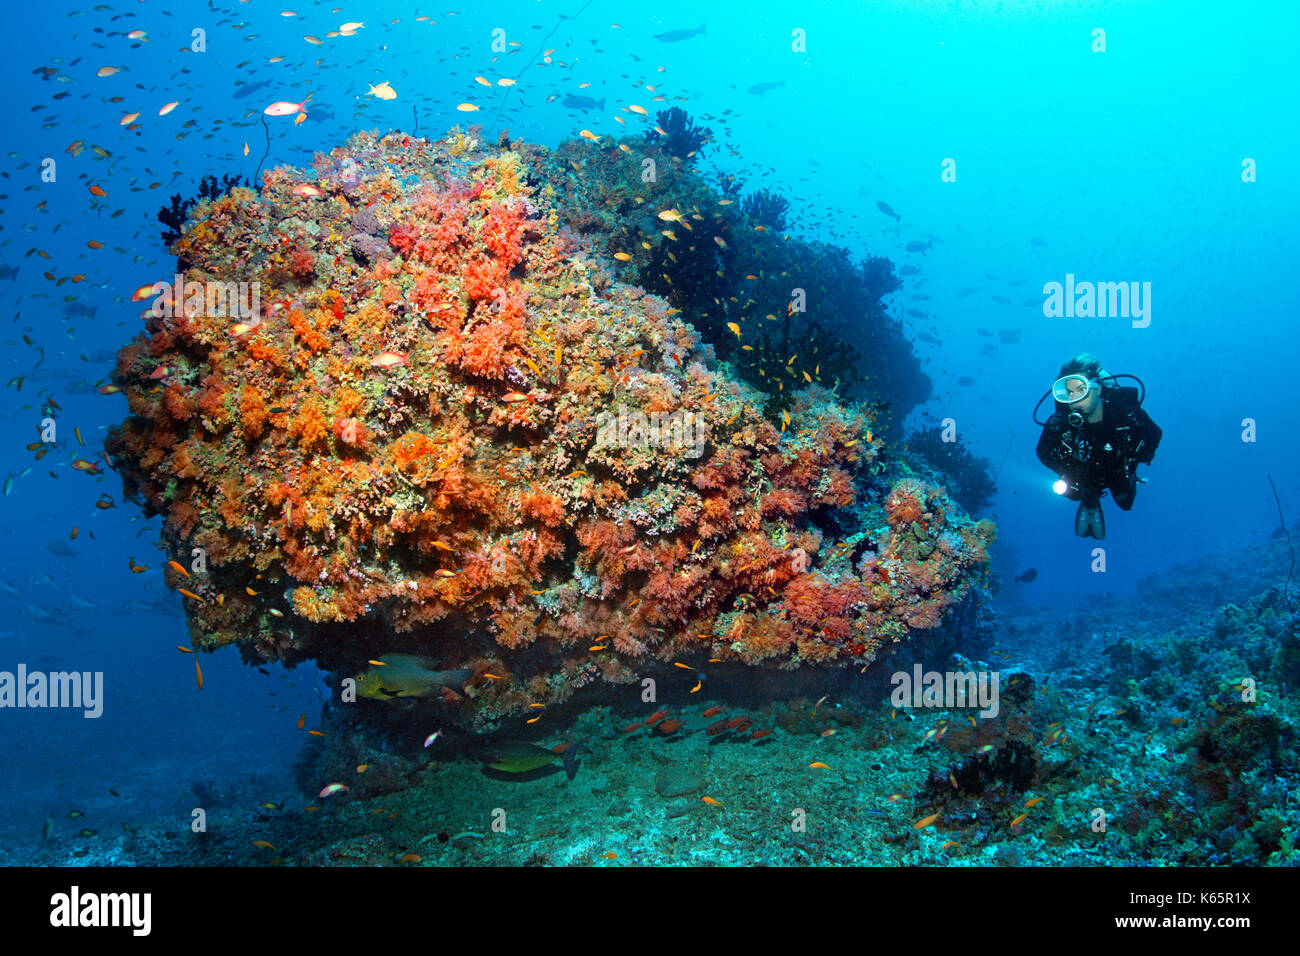 Diver, coral reef, coral block, various red soft corals (Dendronephthya sp.) and swarm of plume perch (Pseudanthias sp.) Stock Photo